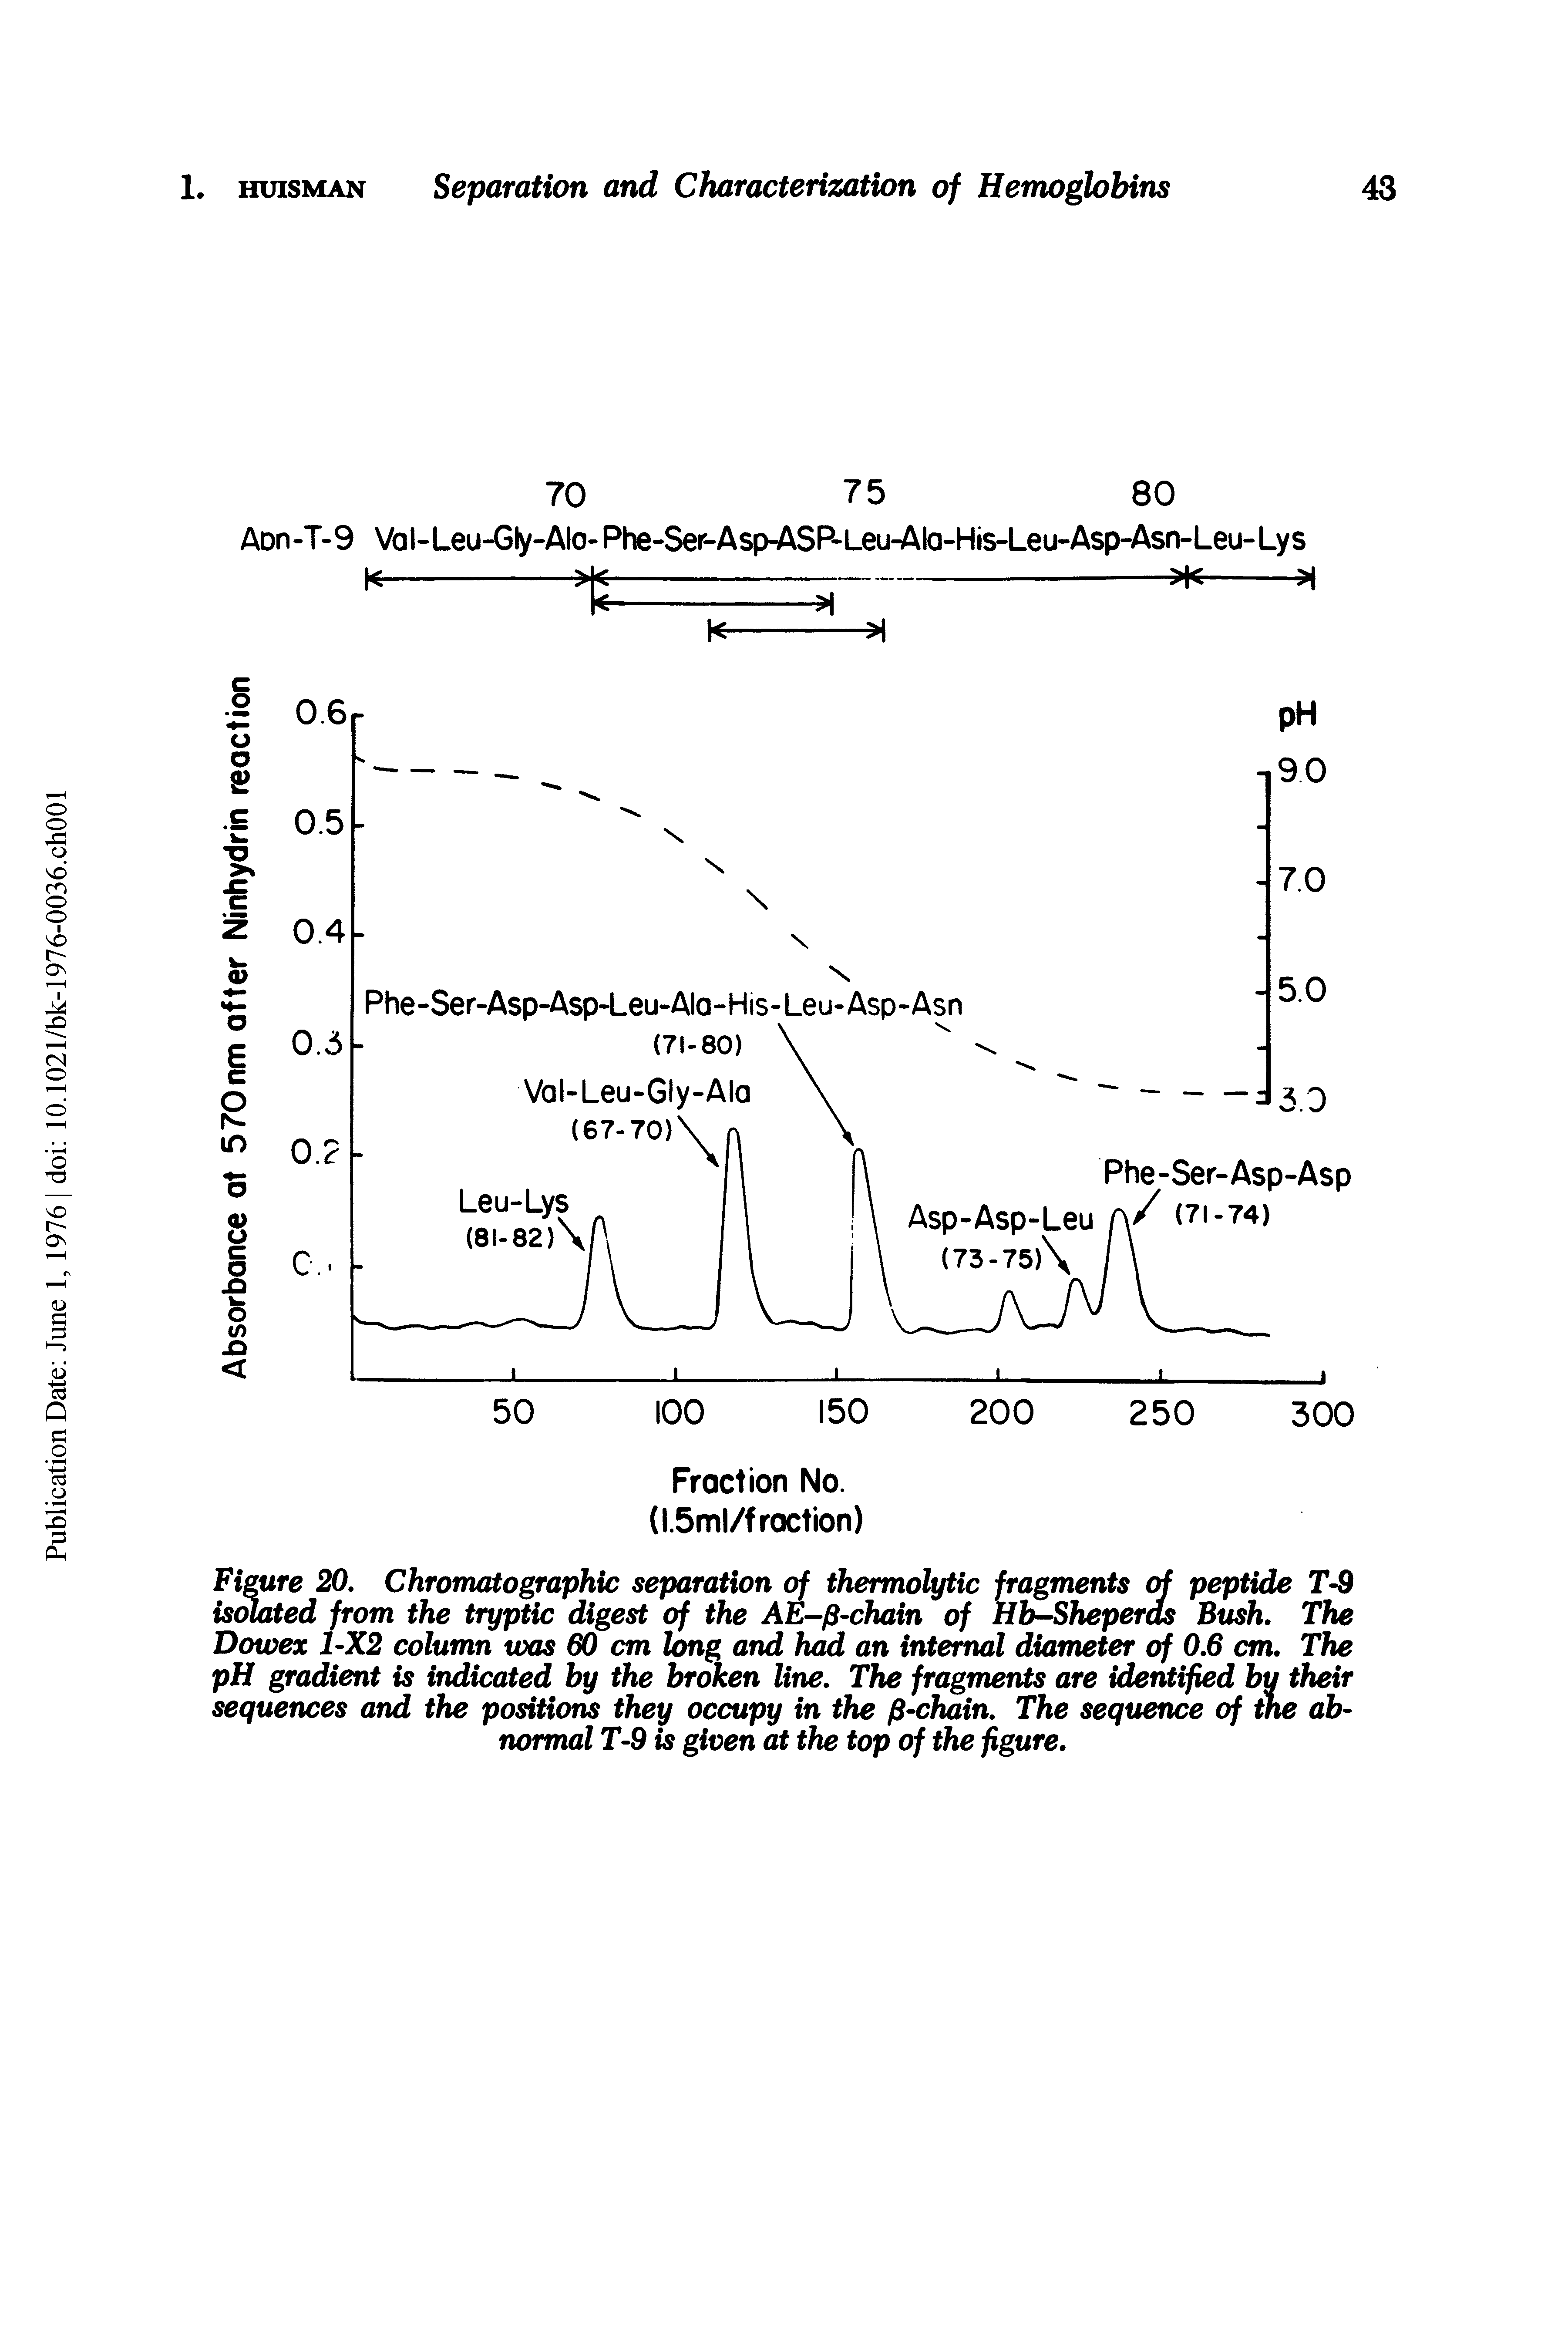 Figure 20. Chromatographic separation of thermolytic fragments of peptide T-9 isolated from the tryptic digest of the AE-p-chain of Hl Sheperds Bush. The Dowex 1-X2 column uxis 60 cm long and had an internal diameter of 0.6 cm. The pH gradient is indicated by the broken line. The fragments are identified bu their sequences and the positions they occupy in the p-chain. The sequence of the abnormal T-9 is given at the top of the figure.